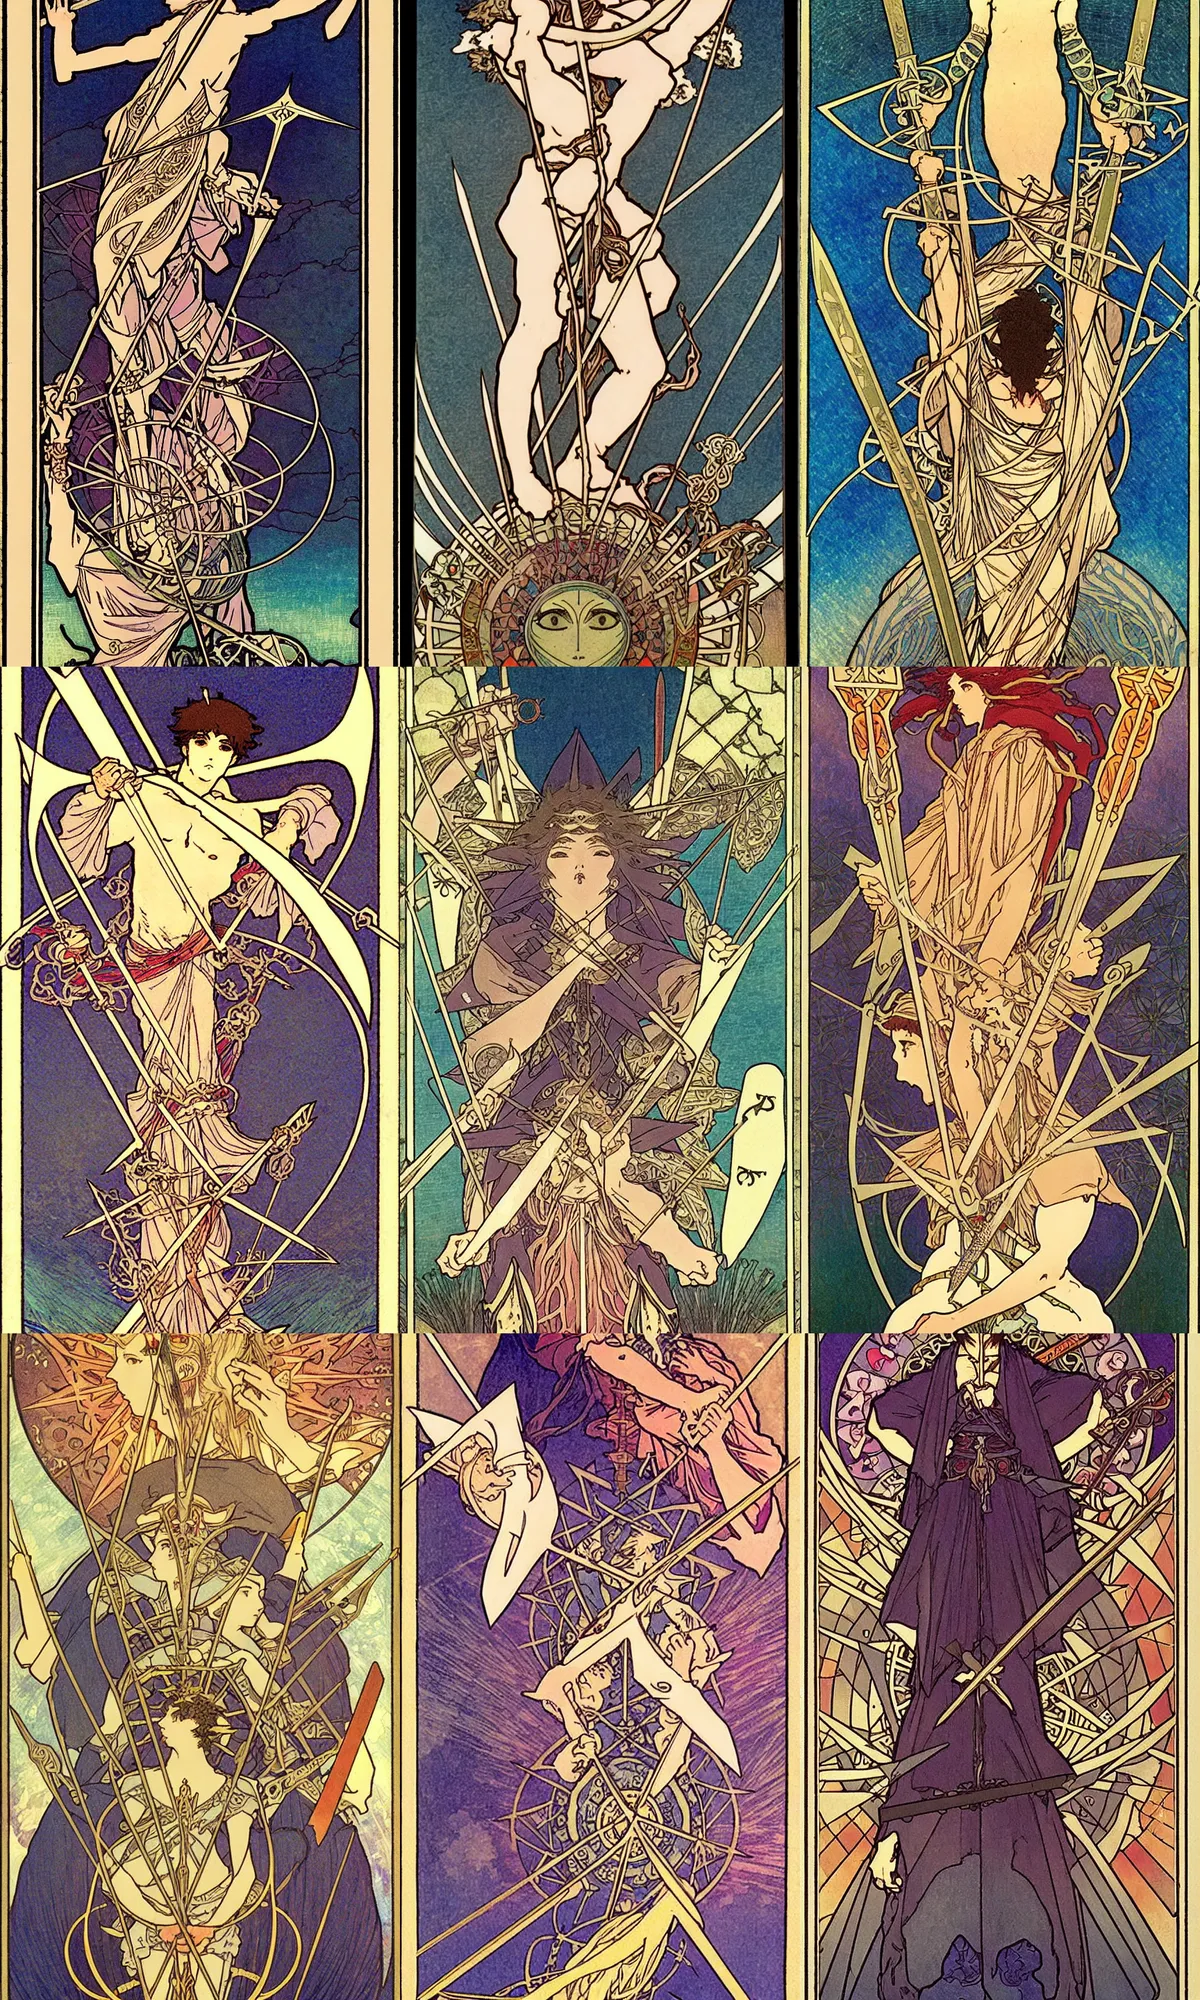 Prompt: tarot card, 3 swords. the three of swords shows a heart pierced by three swords, dark clouds gathering in the background. heartbreak, emotional pain, sorrow, grief, hurt, negative self - talk, releasing pain, optimism, forgiveness. art by mucha, studio ghibli, anime, manga